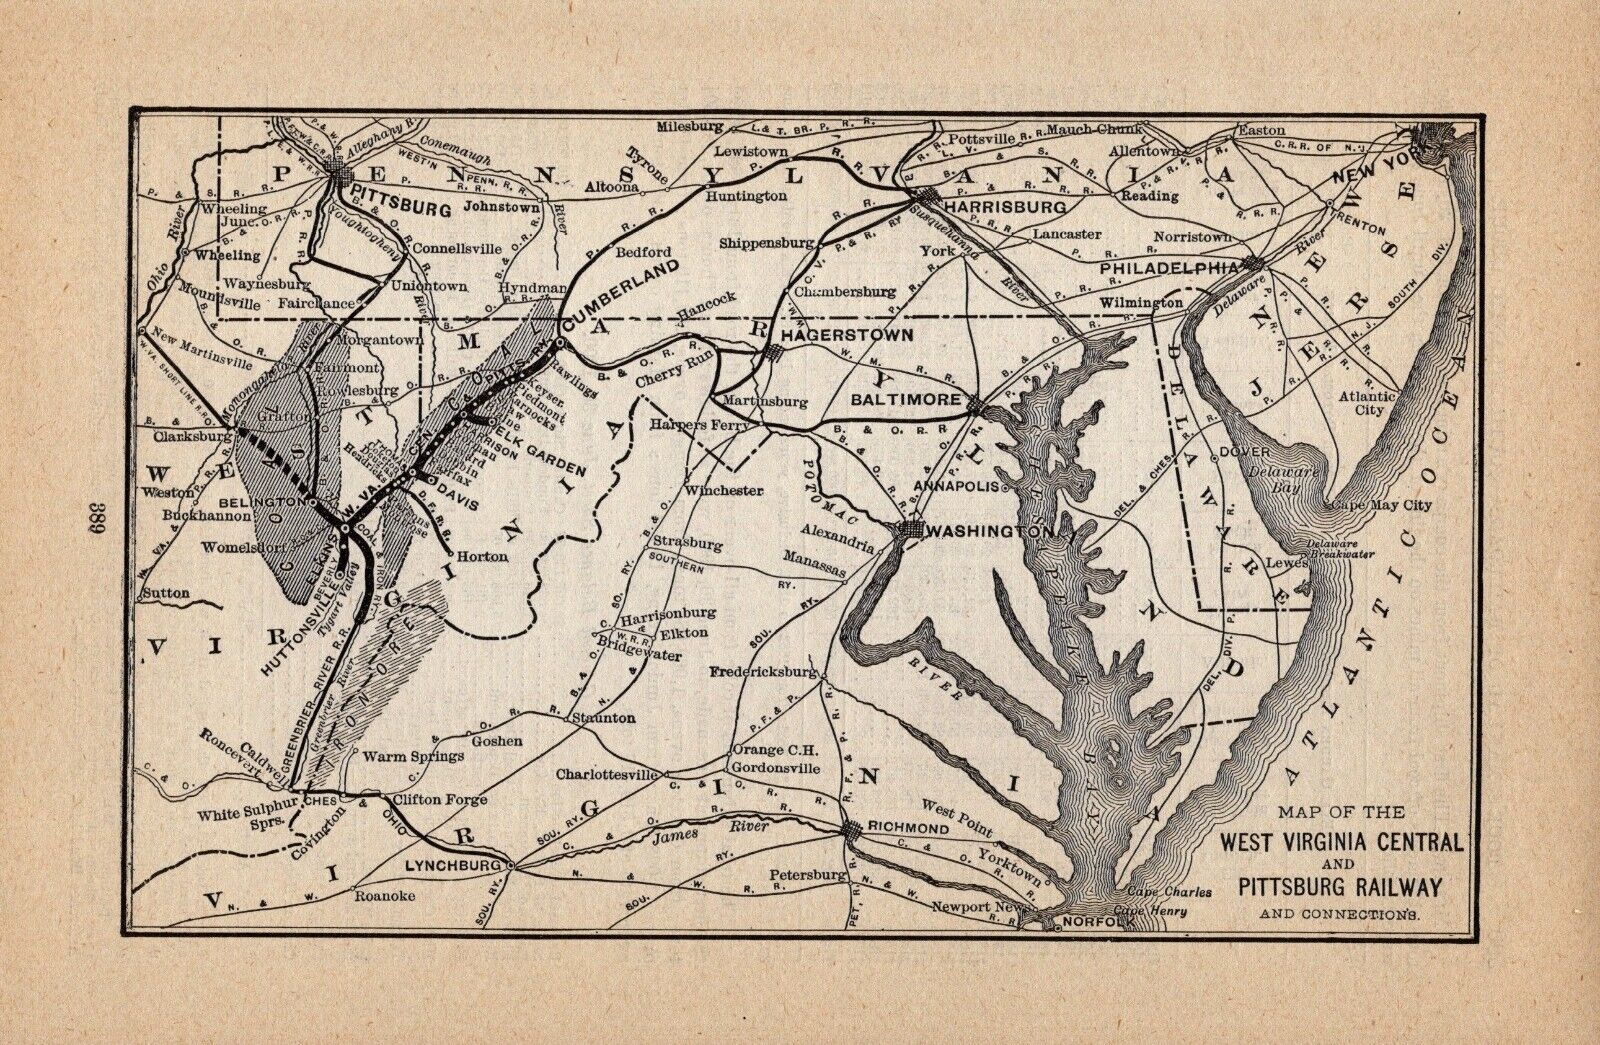 1901 Antique West Virginia Central and Pittsburgh Railway Map 1569